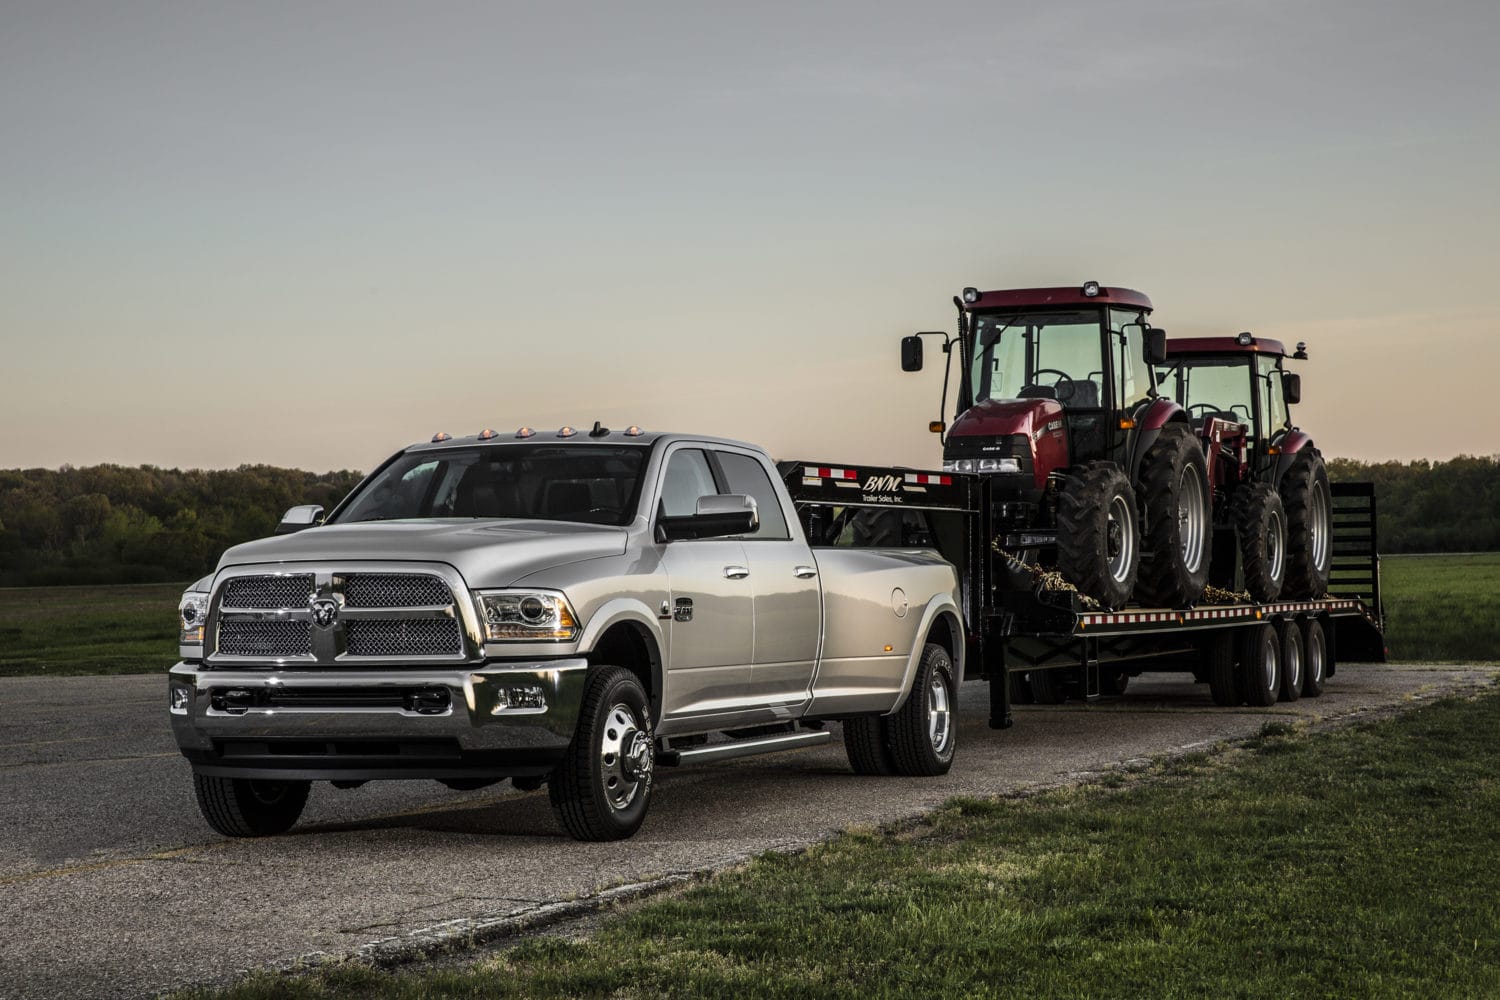 Limited? Not the 2017 RAM 3500 Mega Cab - Focus Daily News